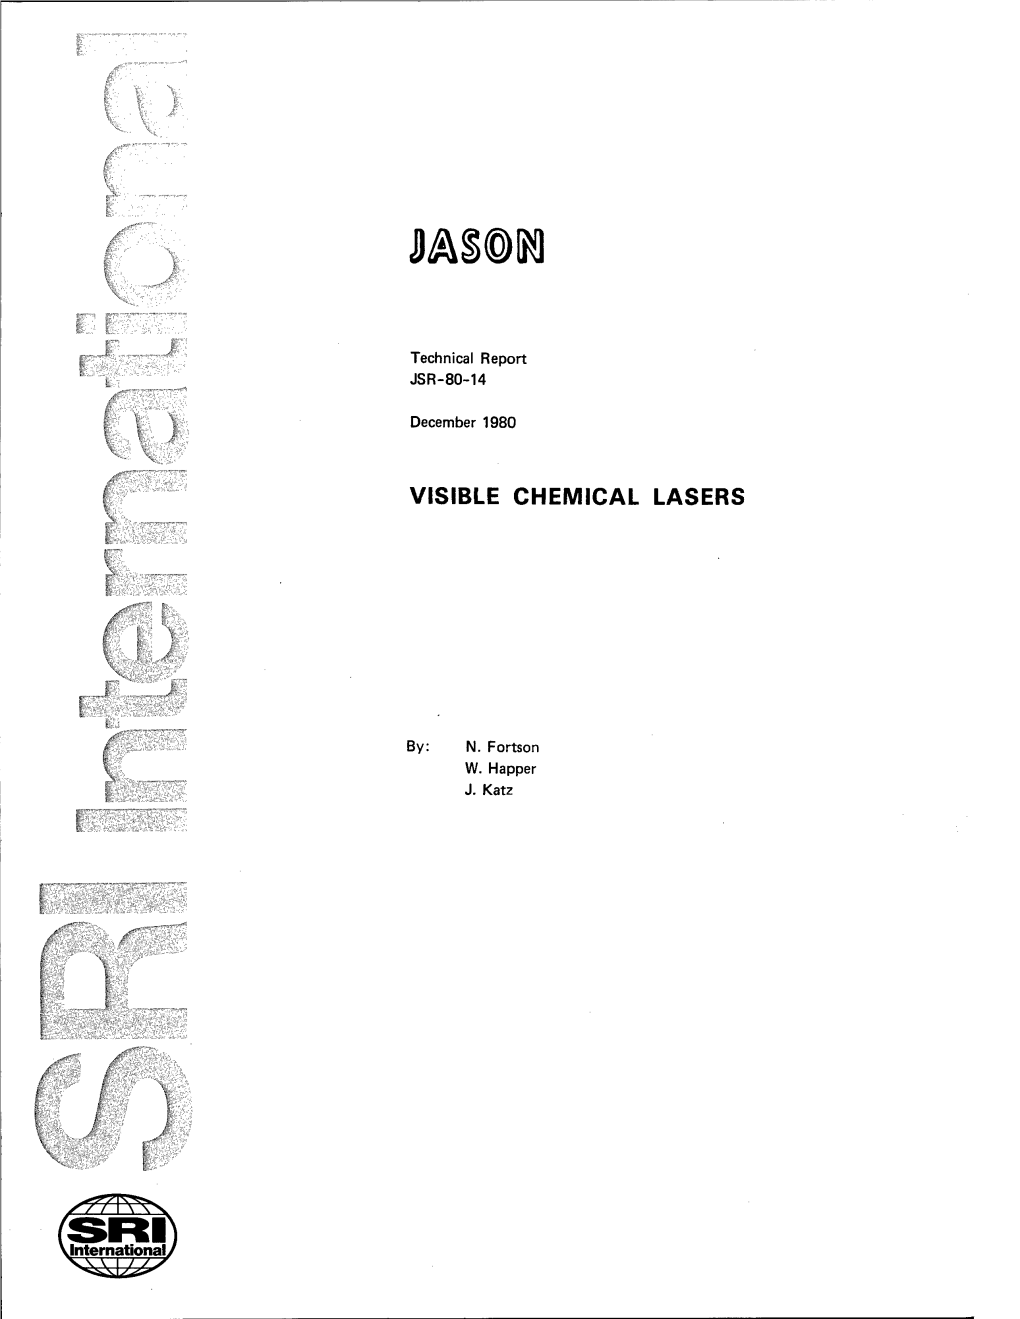 Visible Chemical Lasers